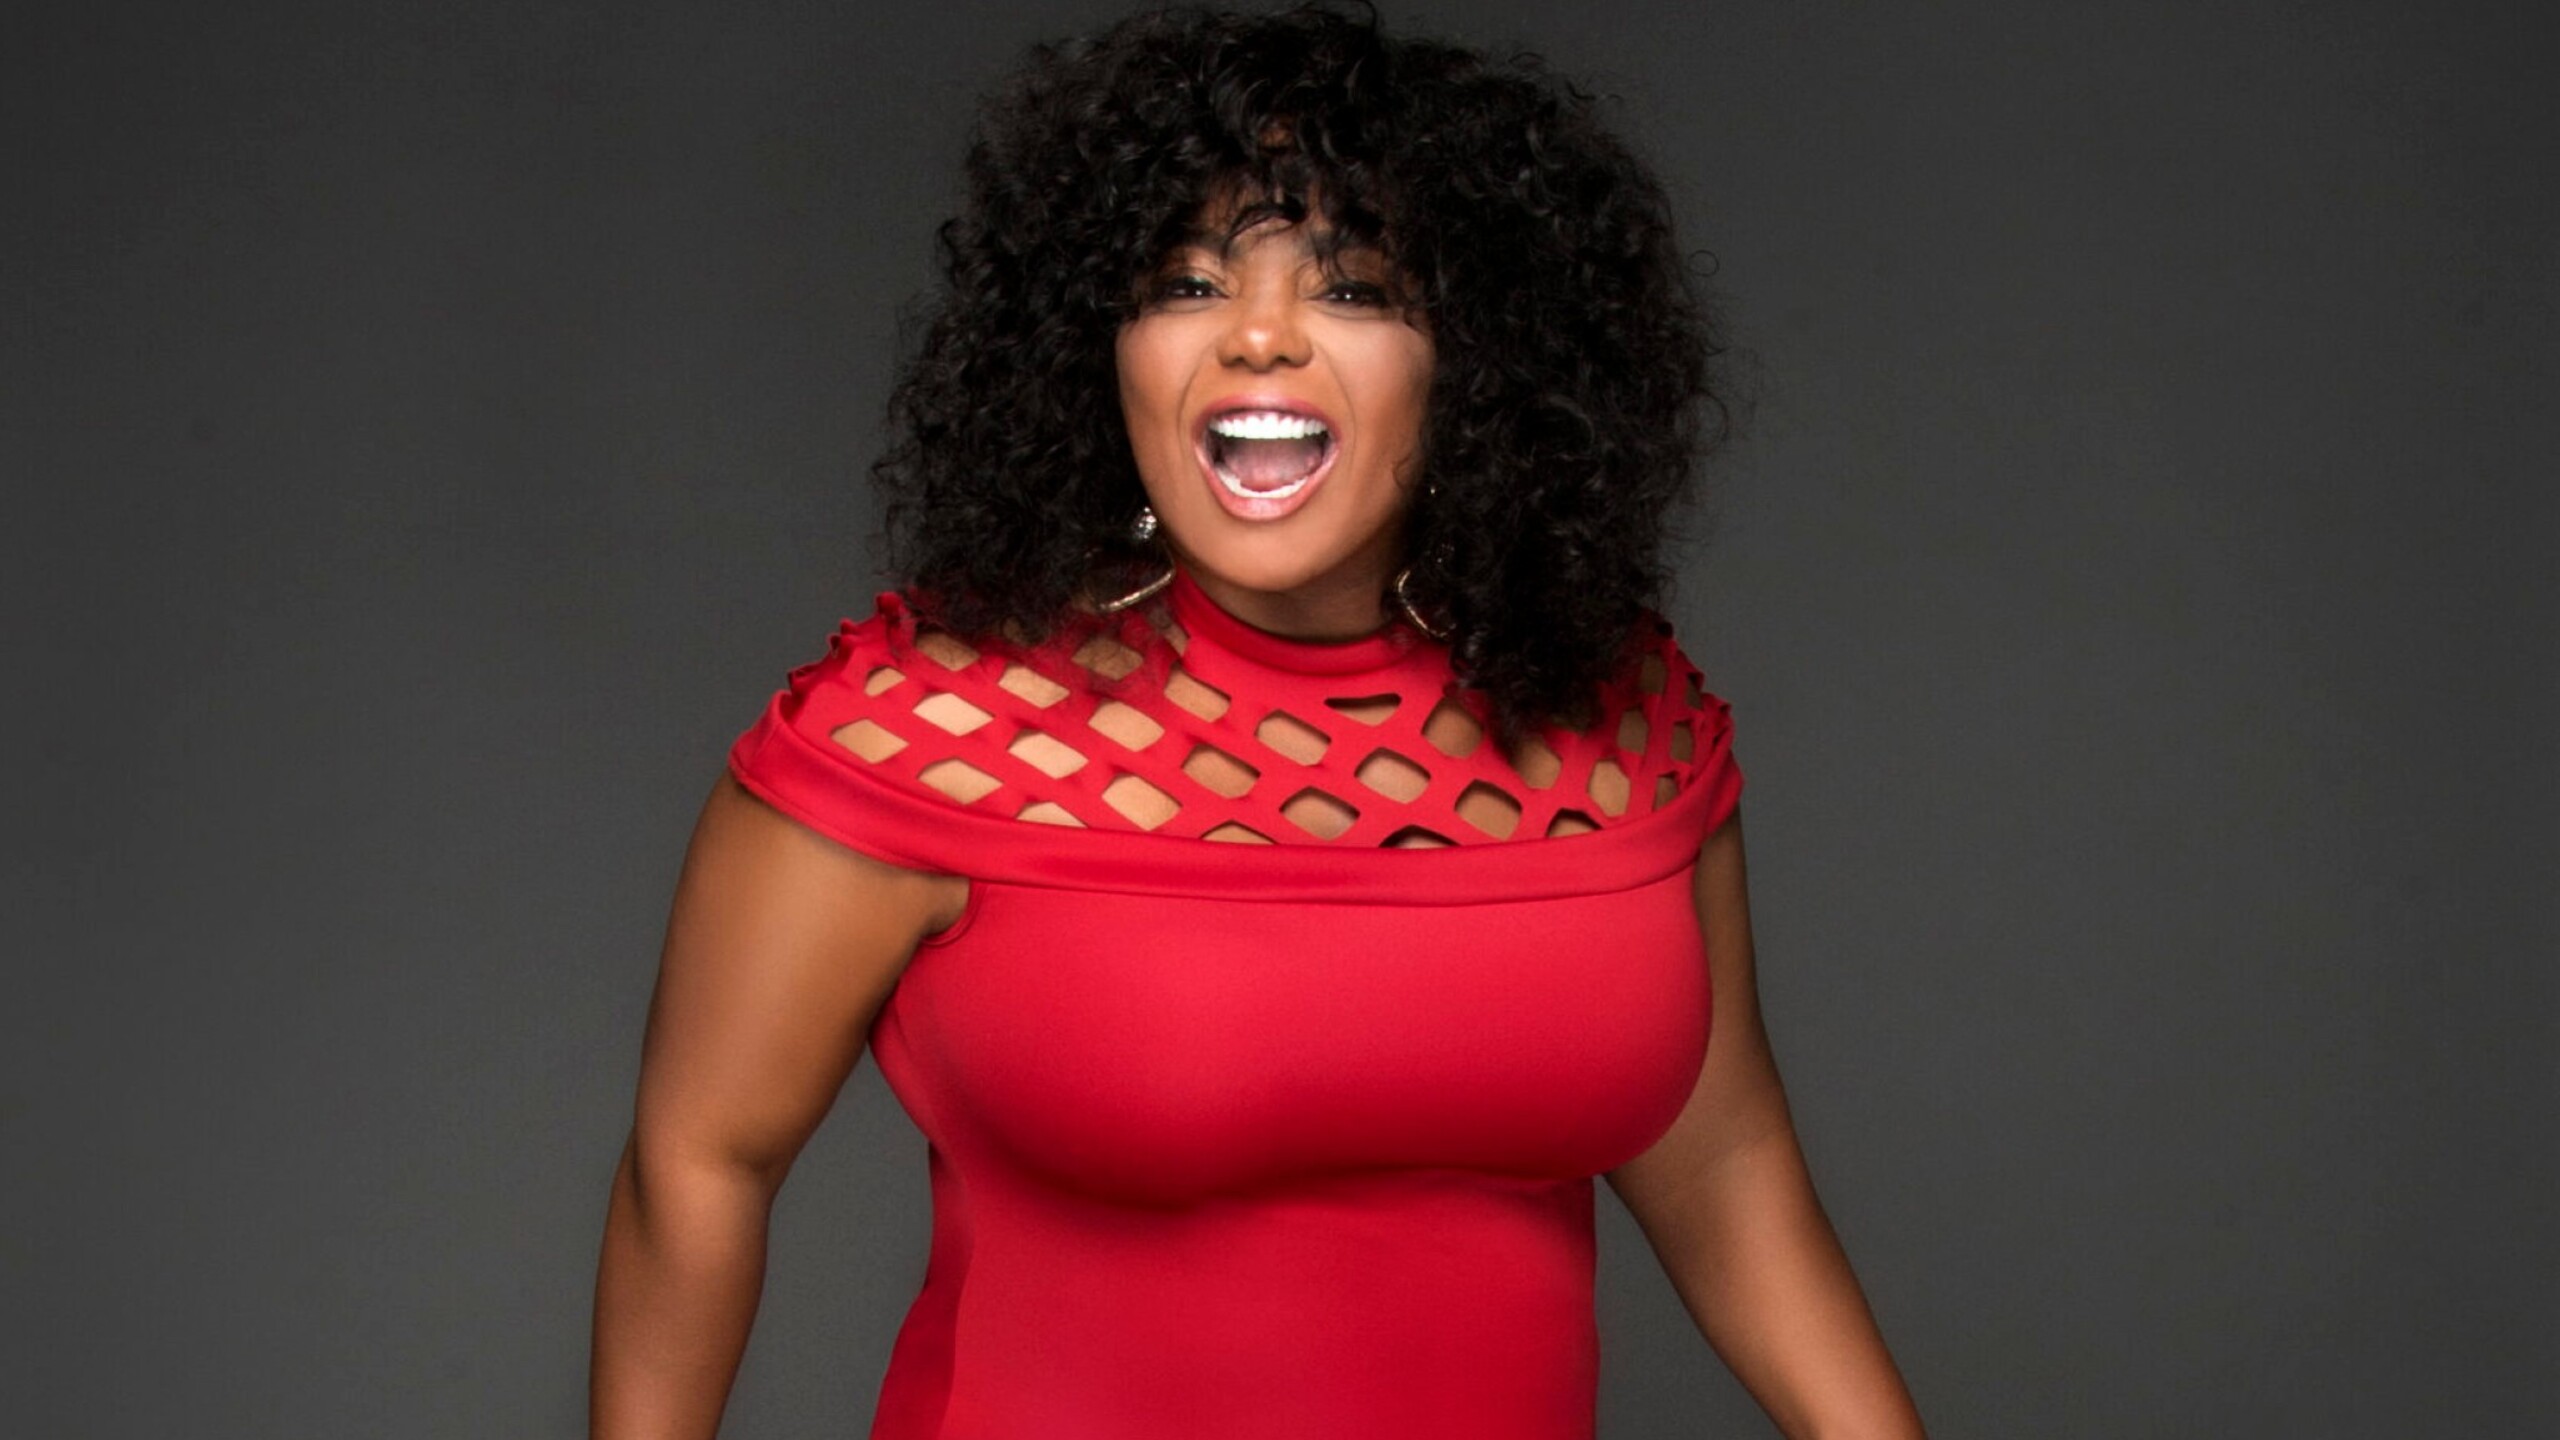 Actress & Comedian Cocoa Brown Dishes on Faith, Career, Latest Movies and Failed Suicide Attempt